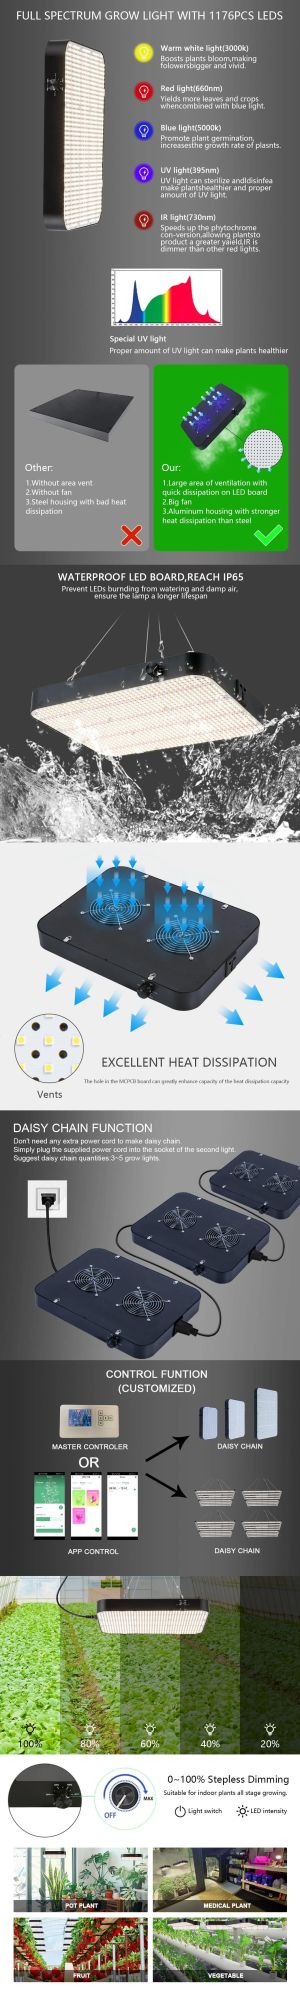 1176PCS LEDs 260 Wattplant Grow Light for Indoor Plants, Dimmable Full Spectrum Grow Light with Daisy Chain and Quiet Cooling Fan for Gardening Plan